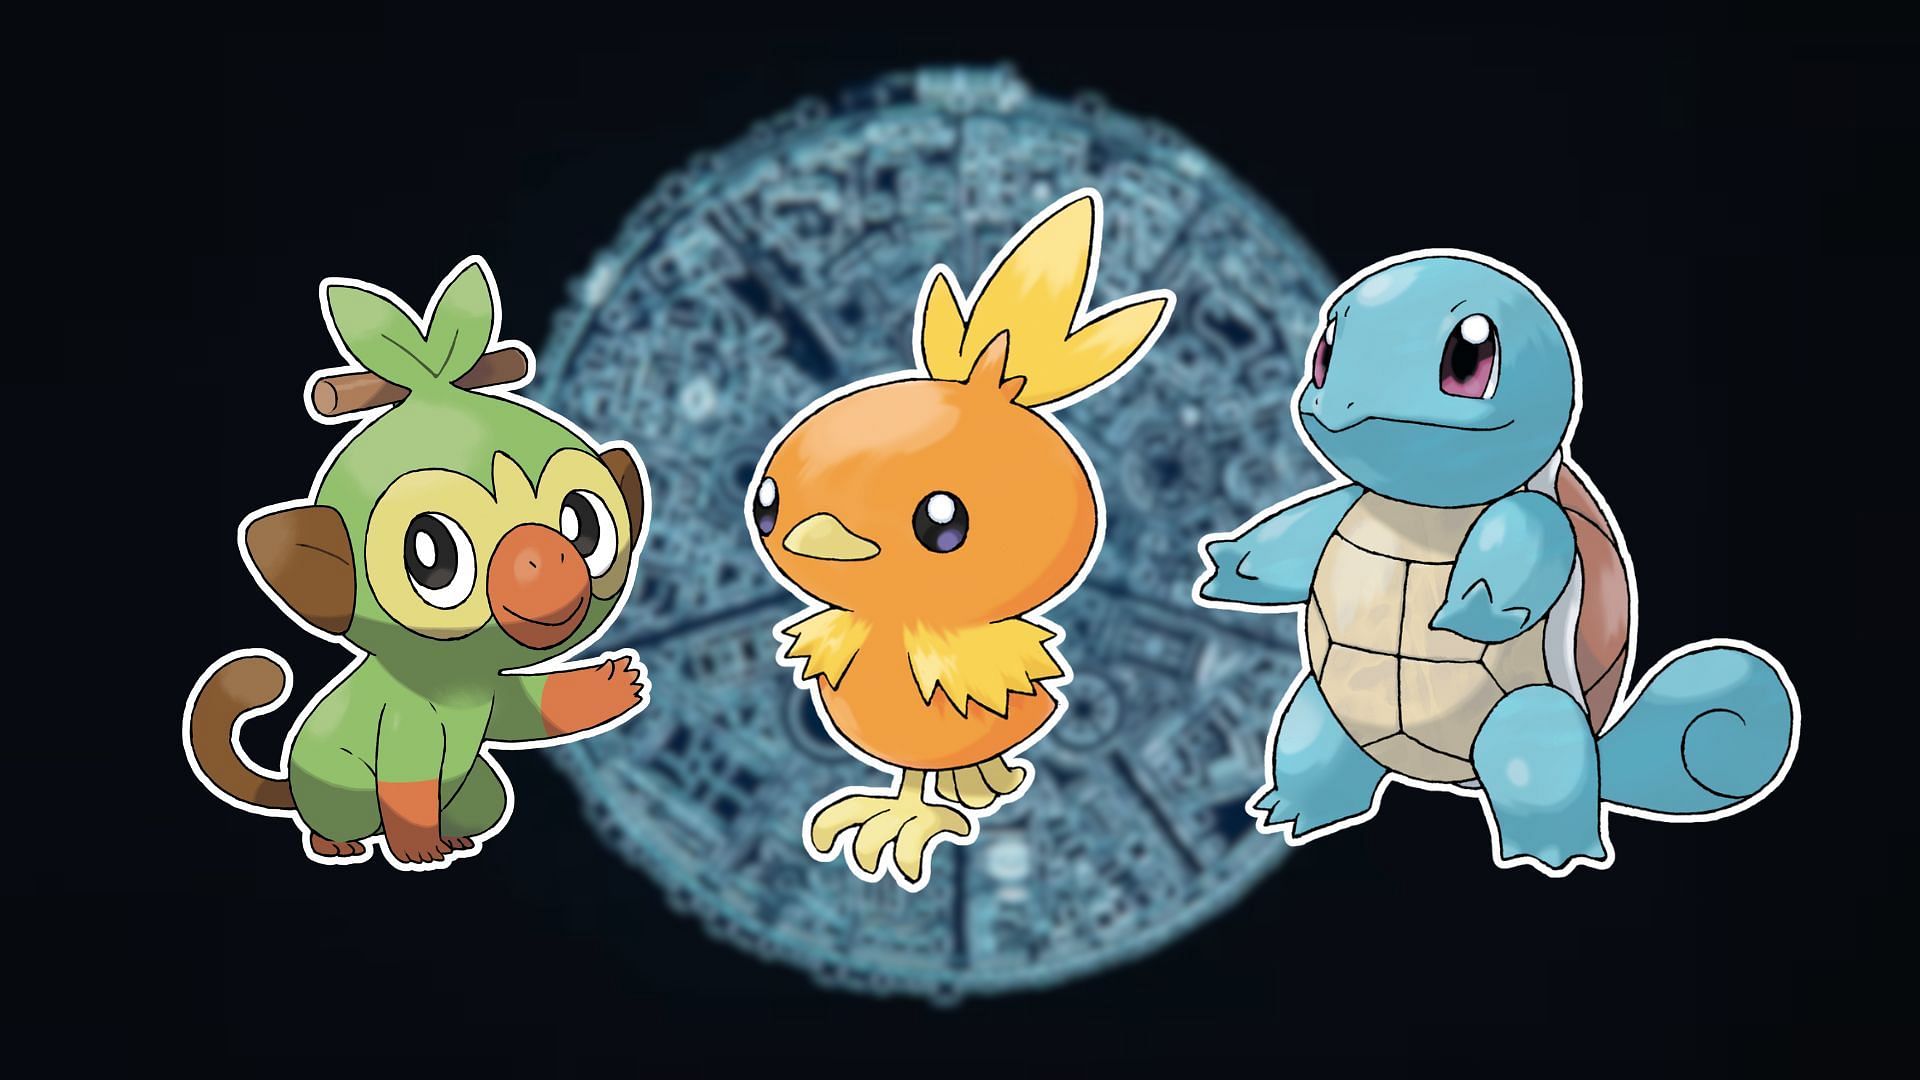 Grookey, Torchic and Squirtle (Image via The Pokemon Company)